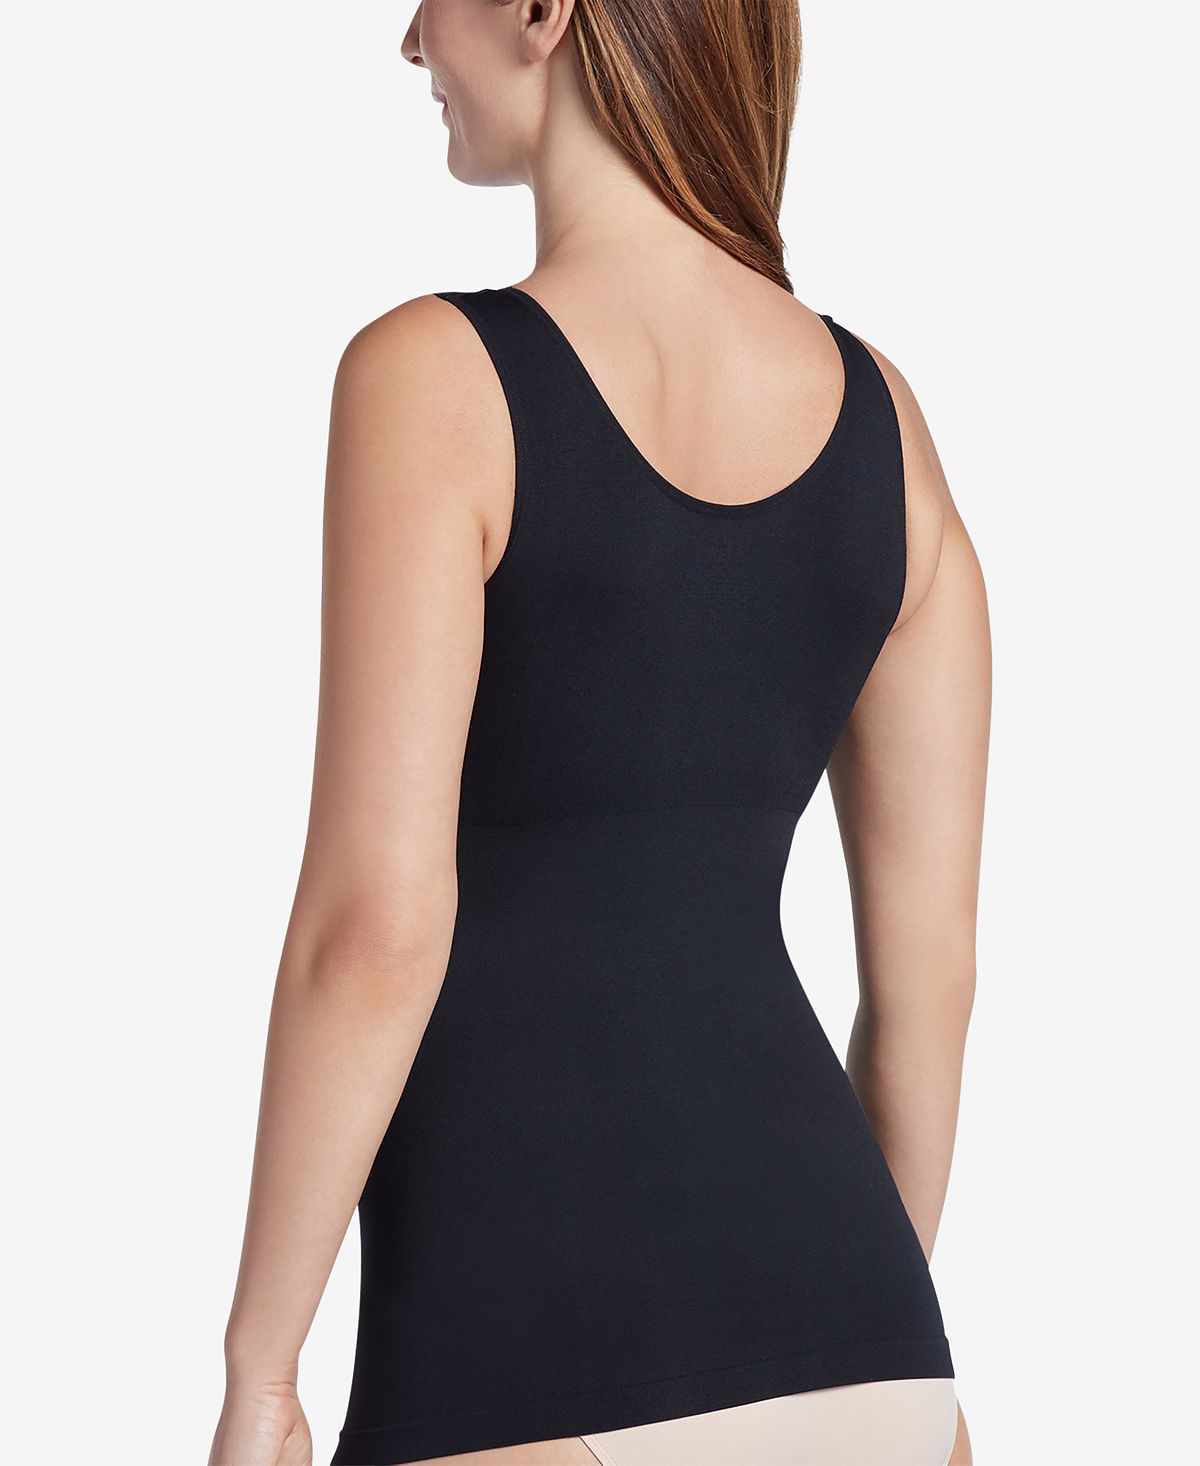 Jockey Wo Slimmers Seamfree Tank 4137 Also Available In Extended Sizes Black